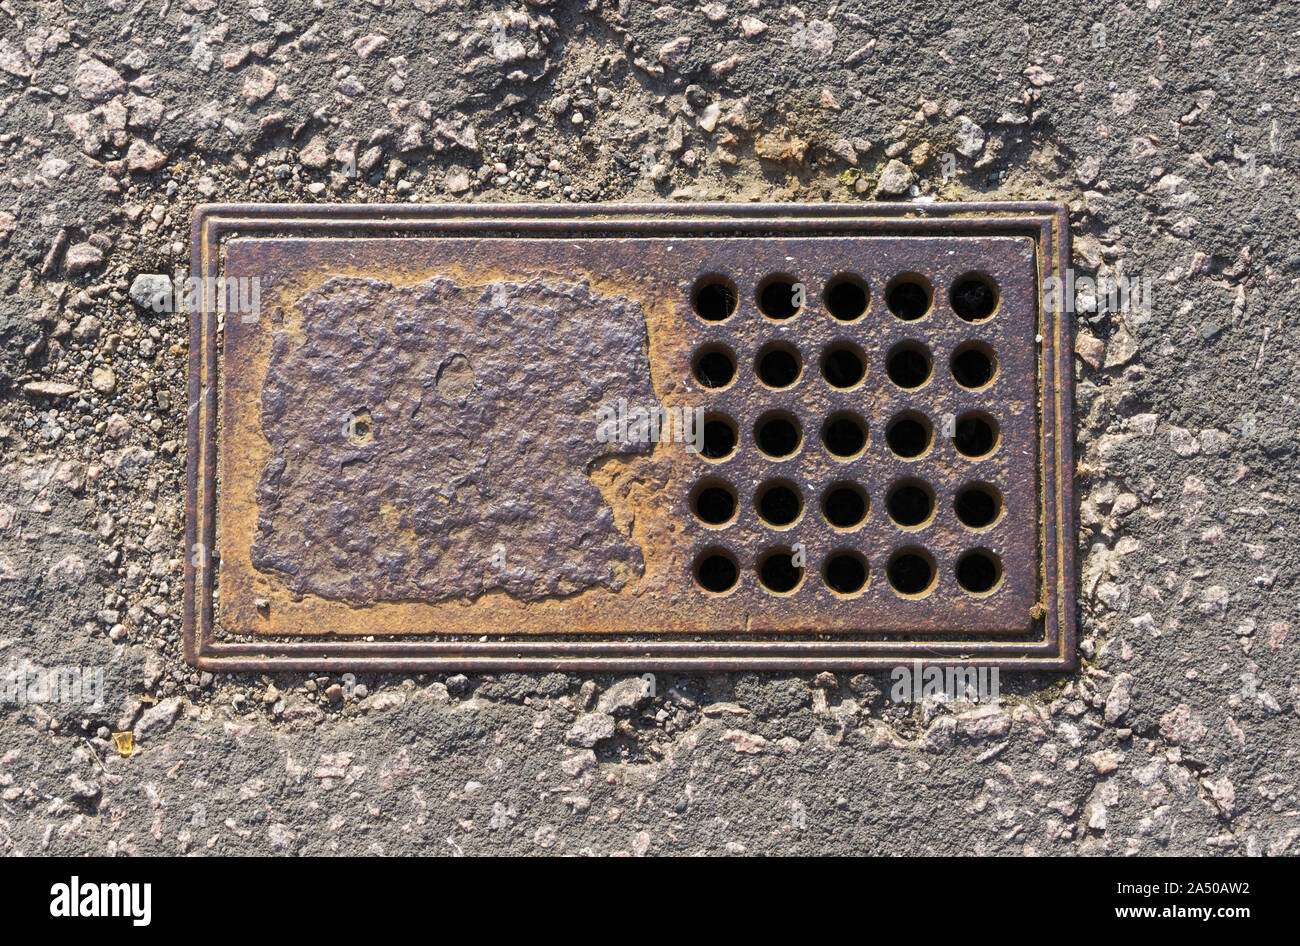 Old drain or water supply access cover on a pavement in the UK. Stock Photo